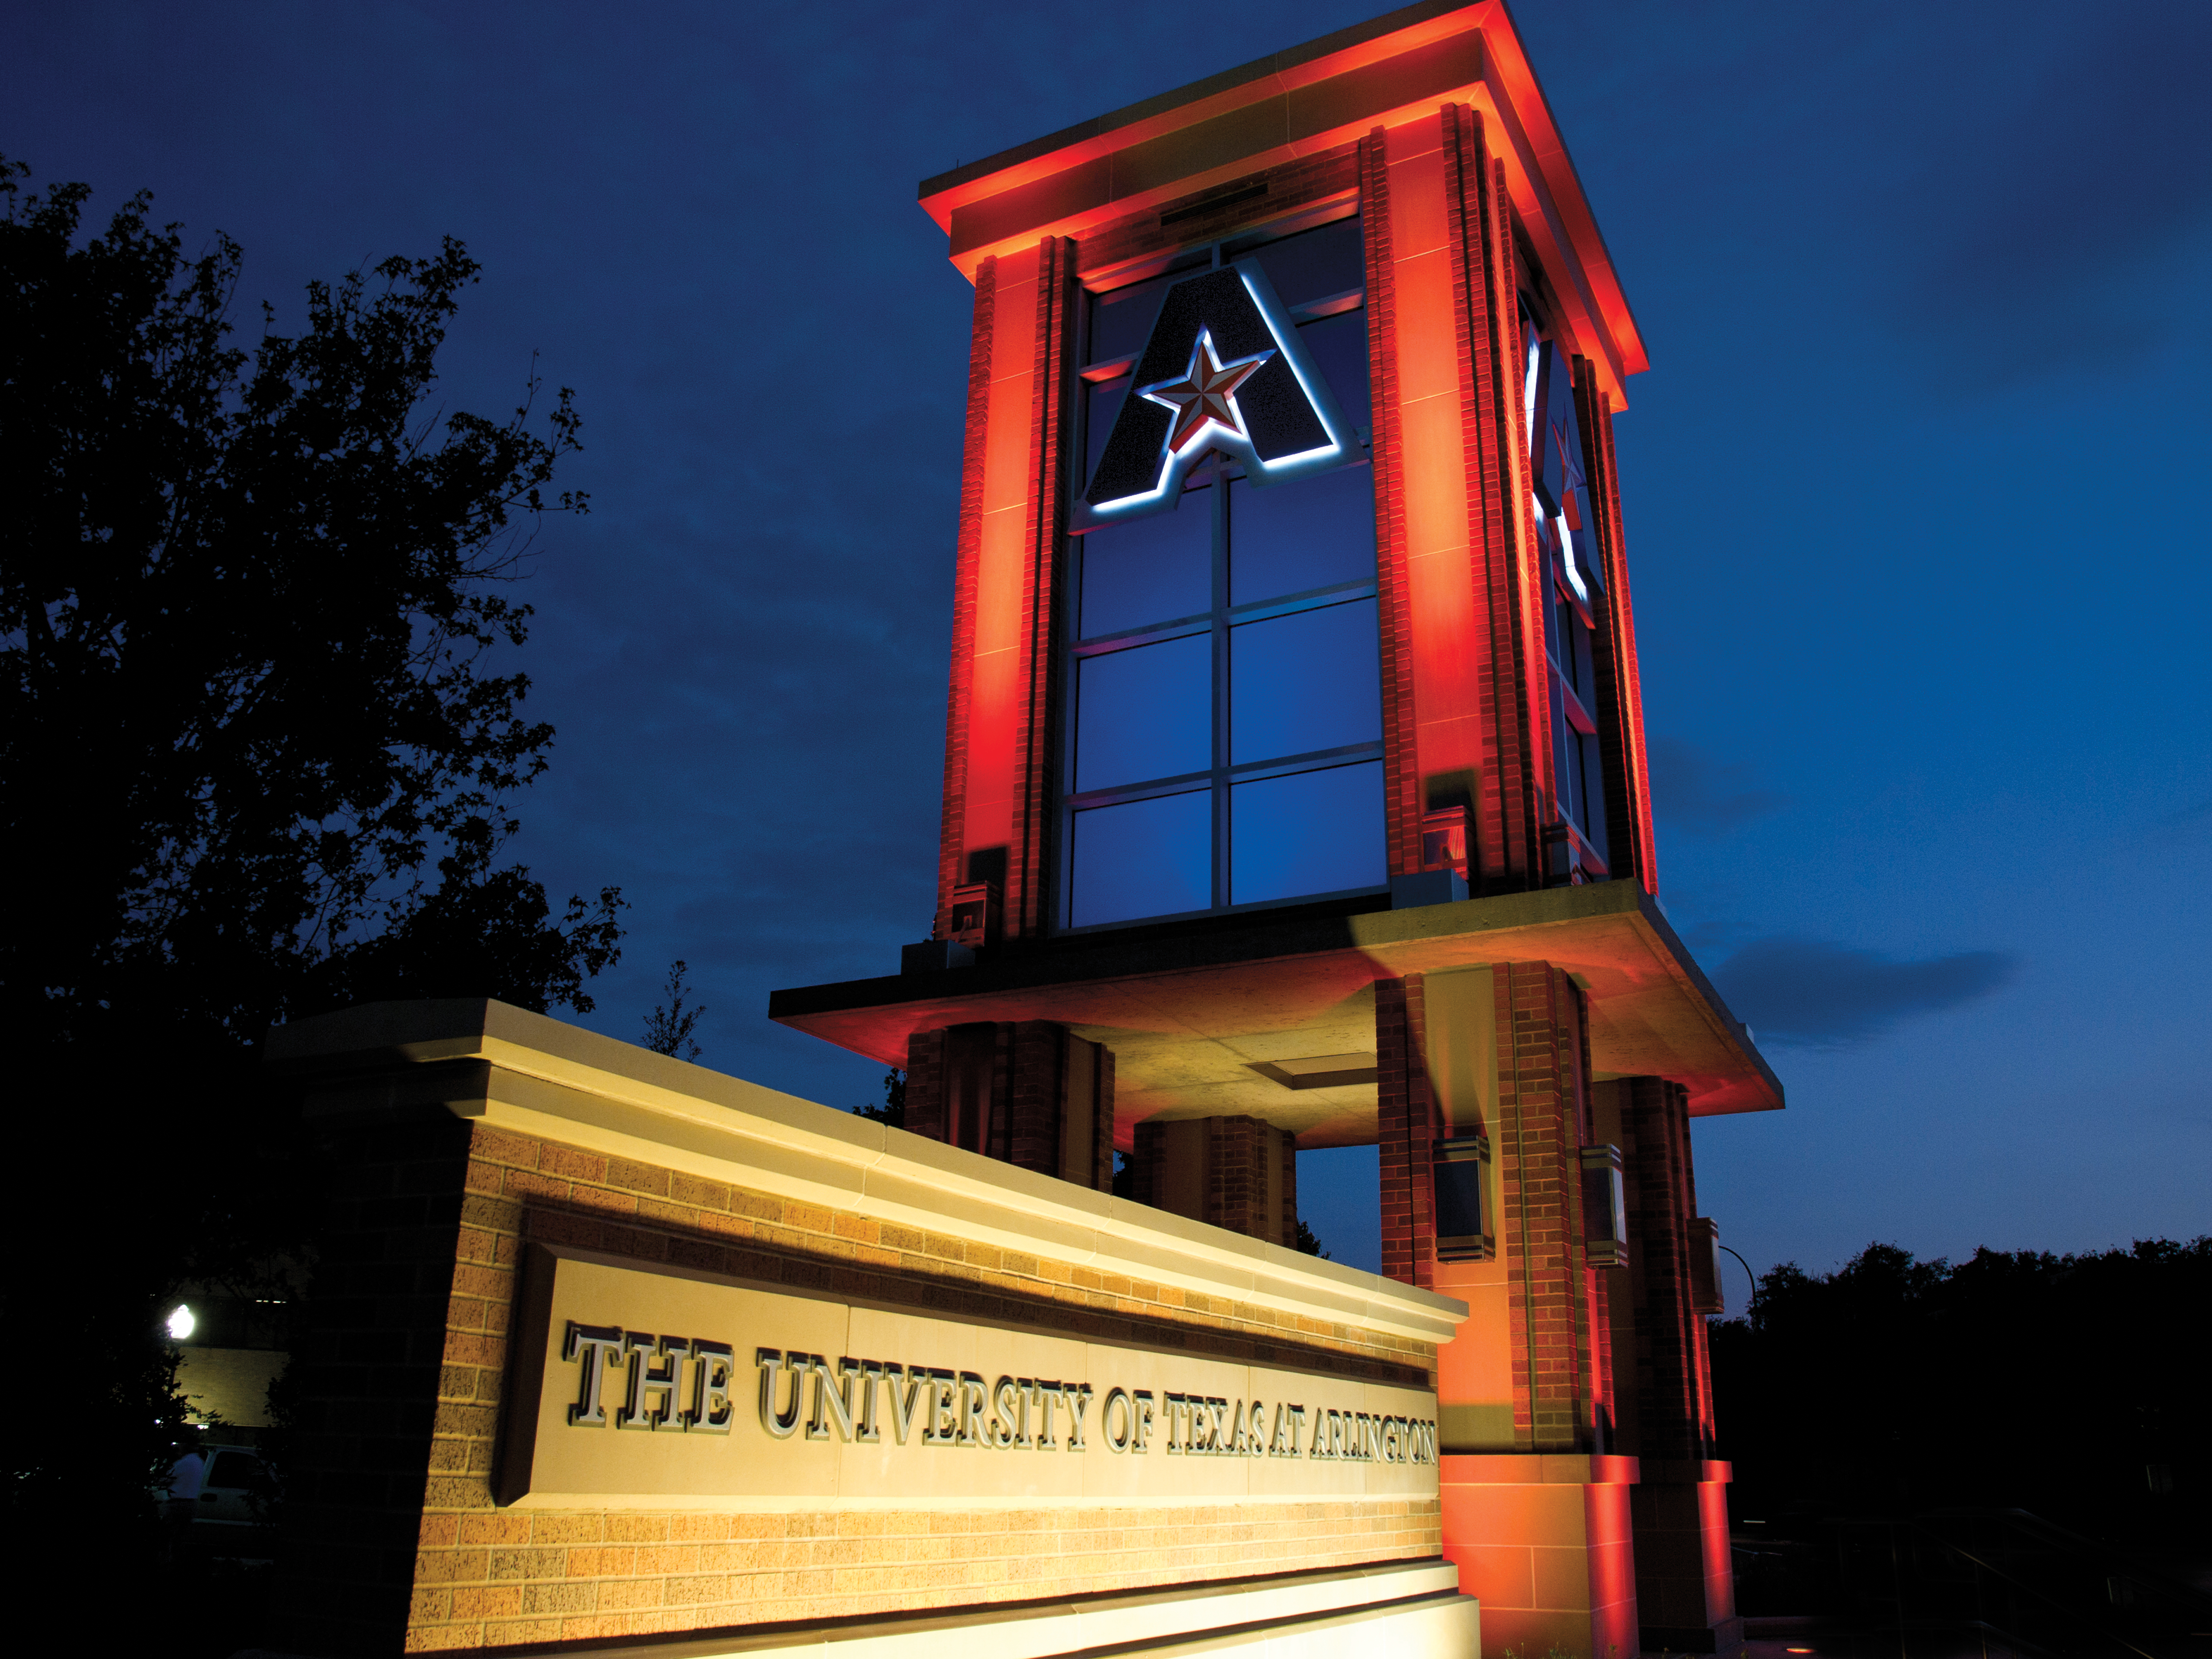 The University of Texas at Arlington: Great engineering education, strong support system